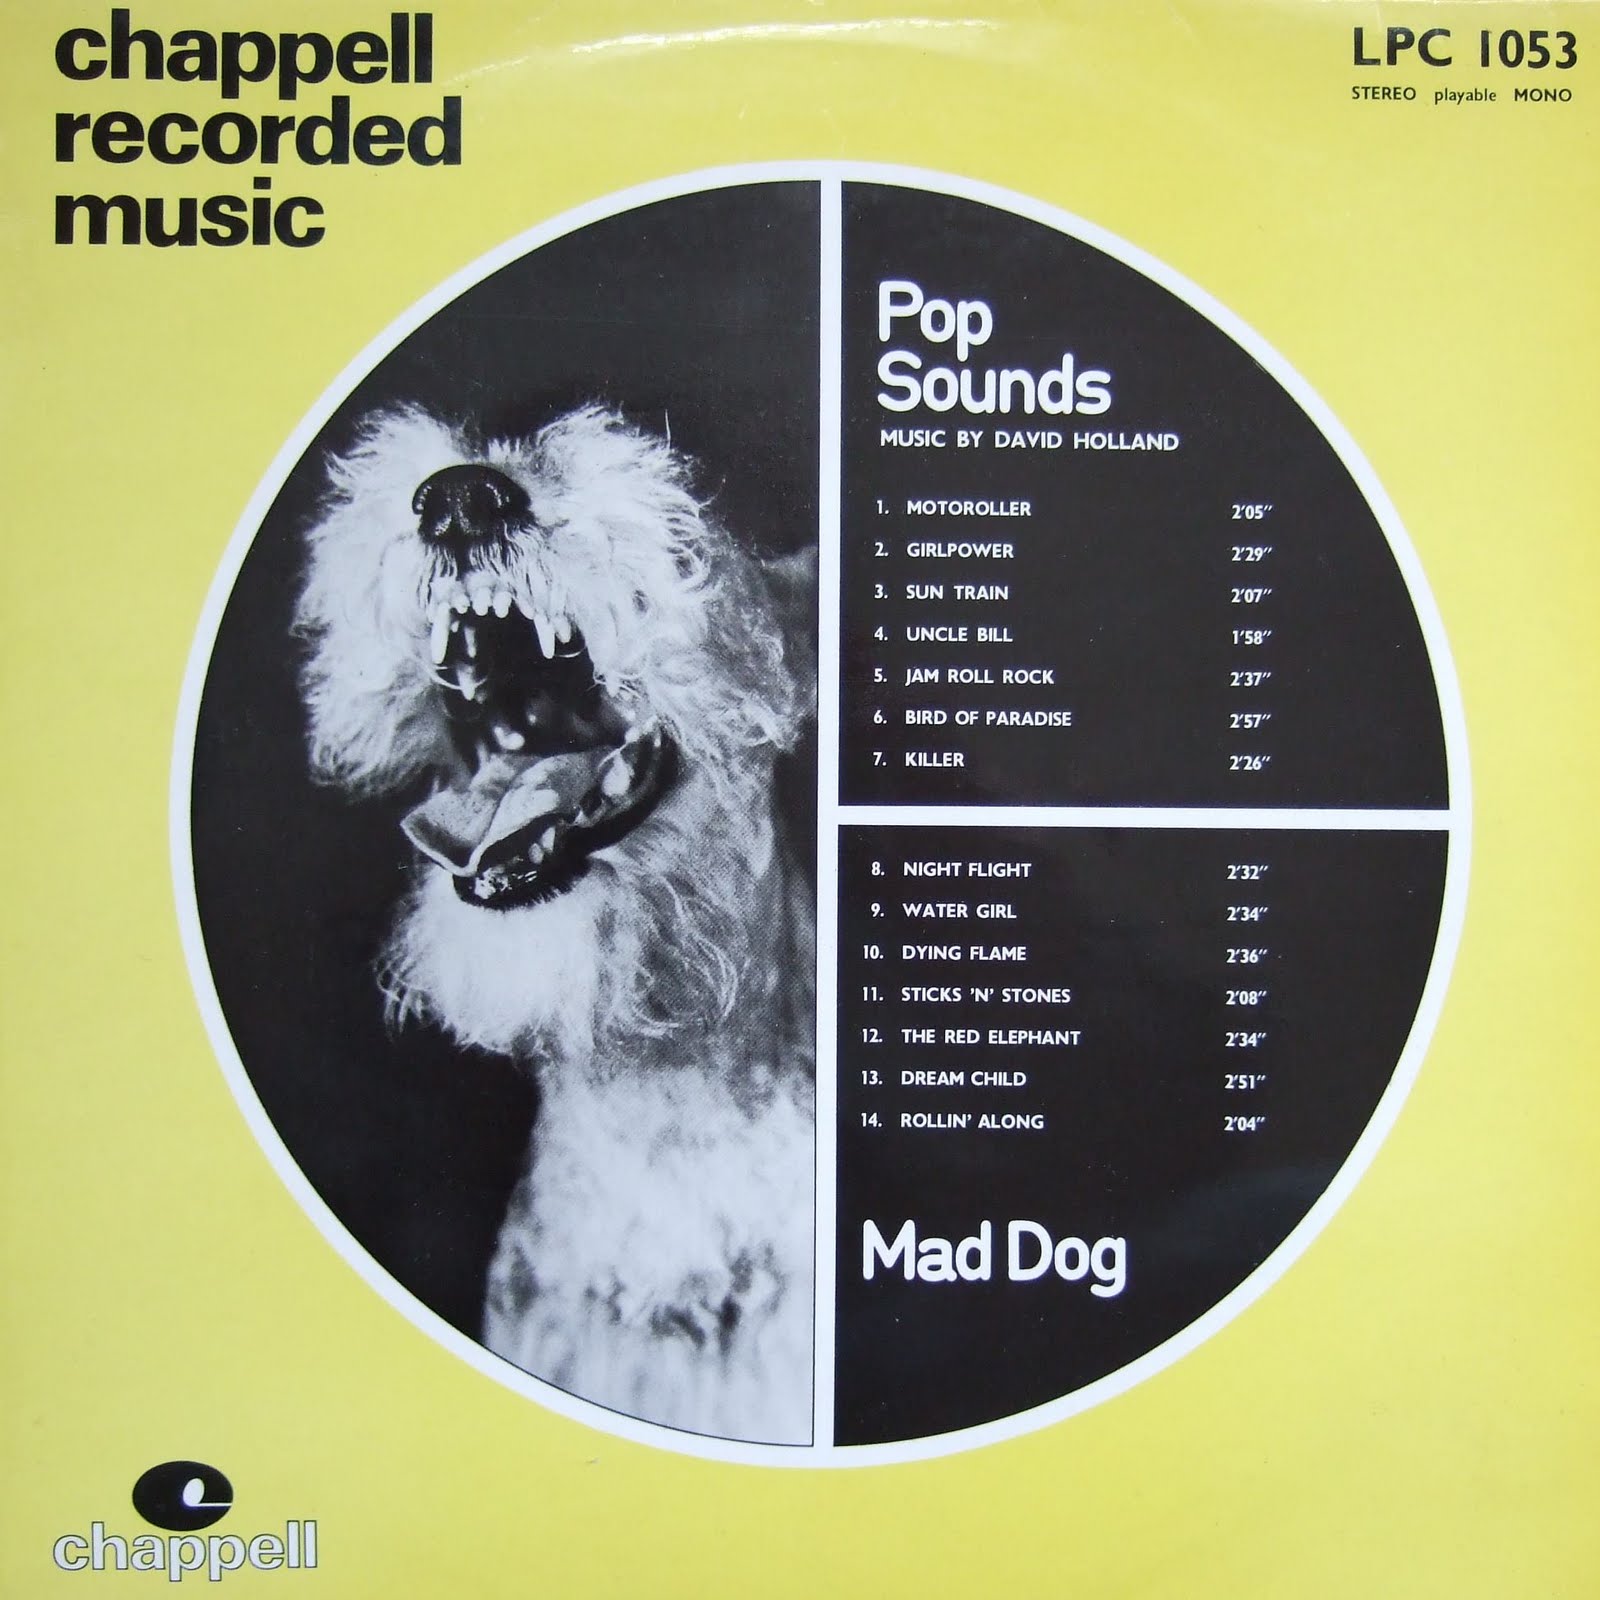 [Chappell] - LPC 1053 - Mad Dog - Pop Sounds - Music By David Holland [1973]